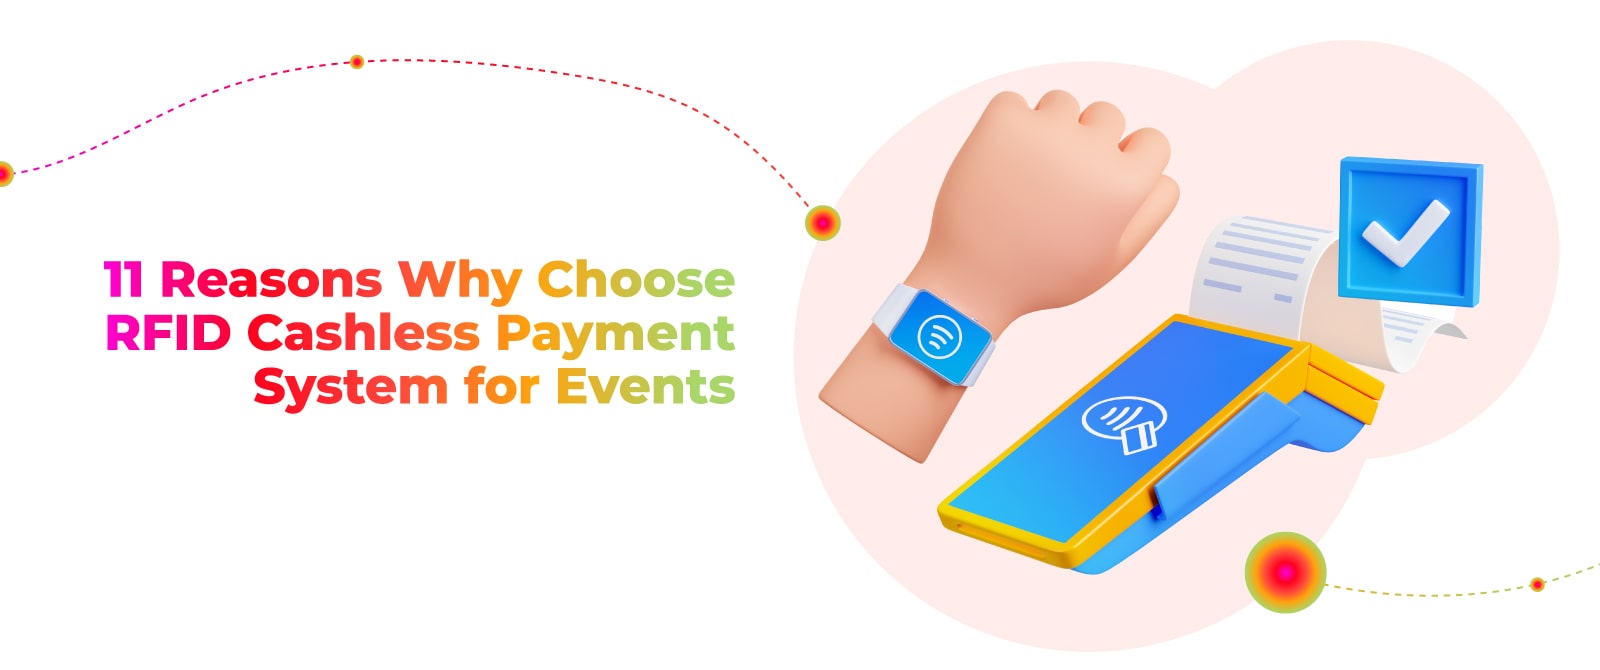 RFID Cashless Payment System for Events: 11 Reasons to Use